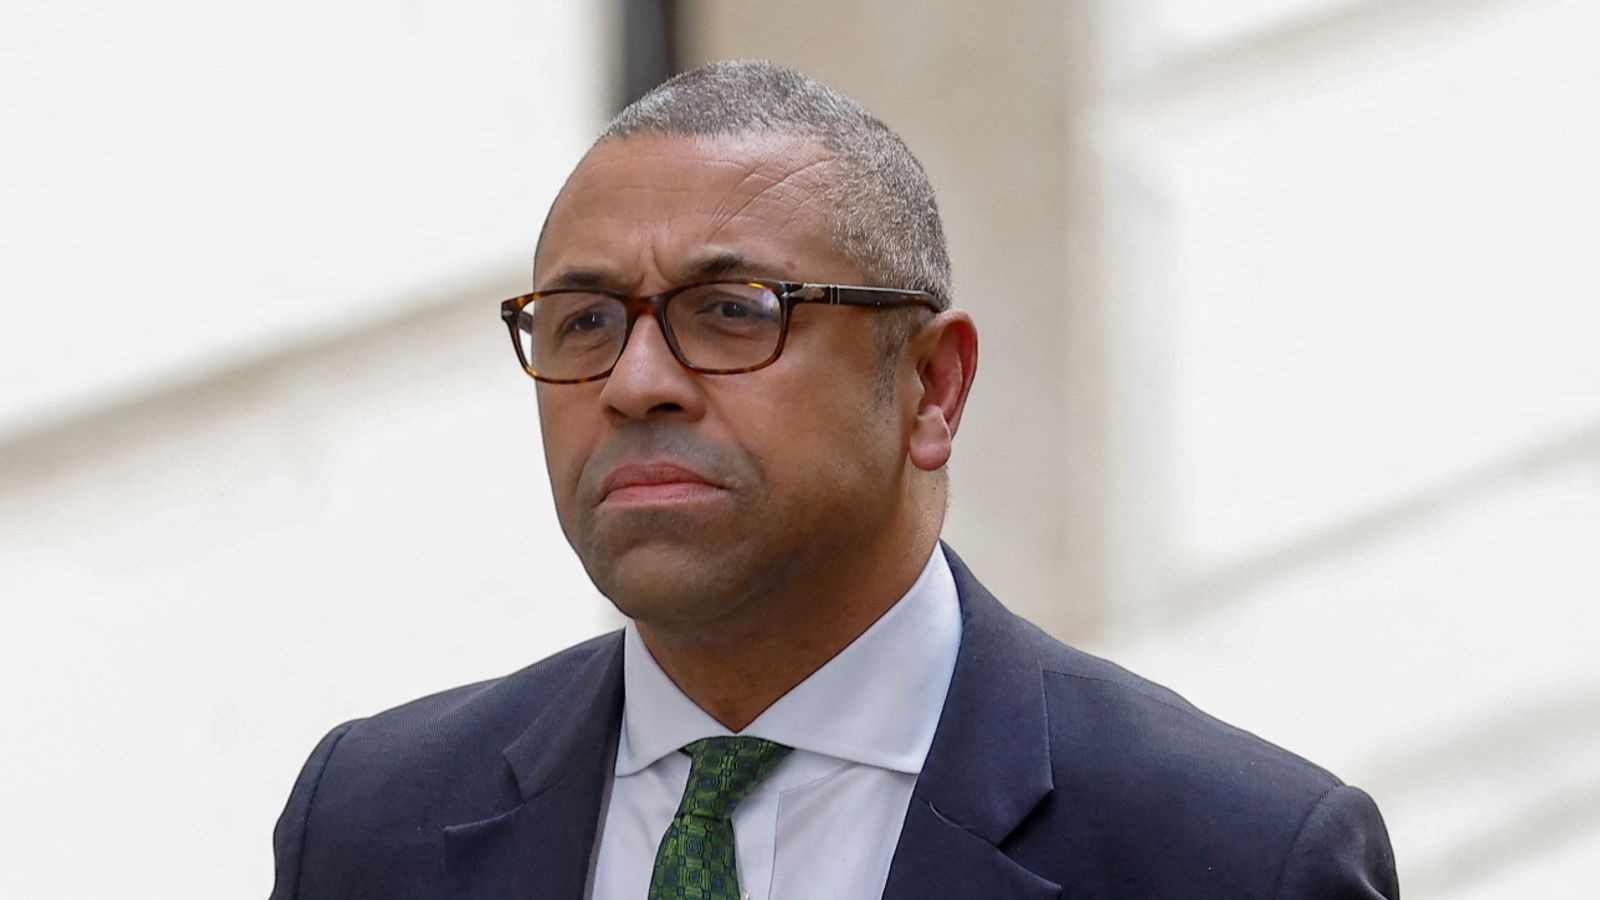 Foreign Secretary James Cleverly to urge UN leaders to starve terrorists of money to prevent attacks